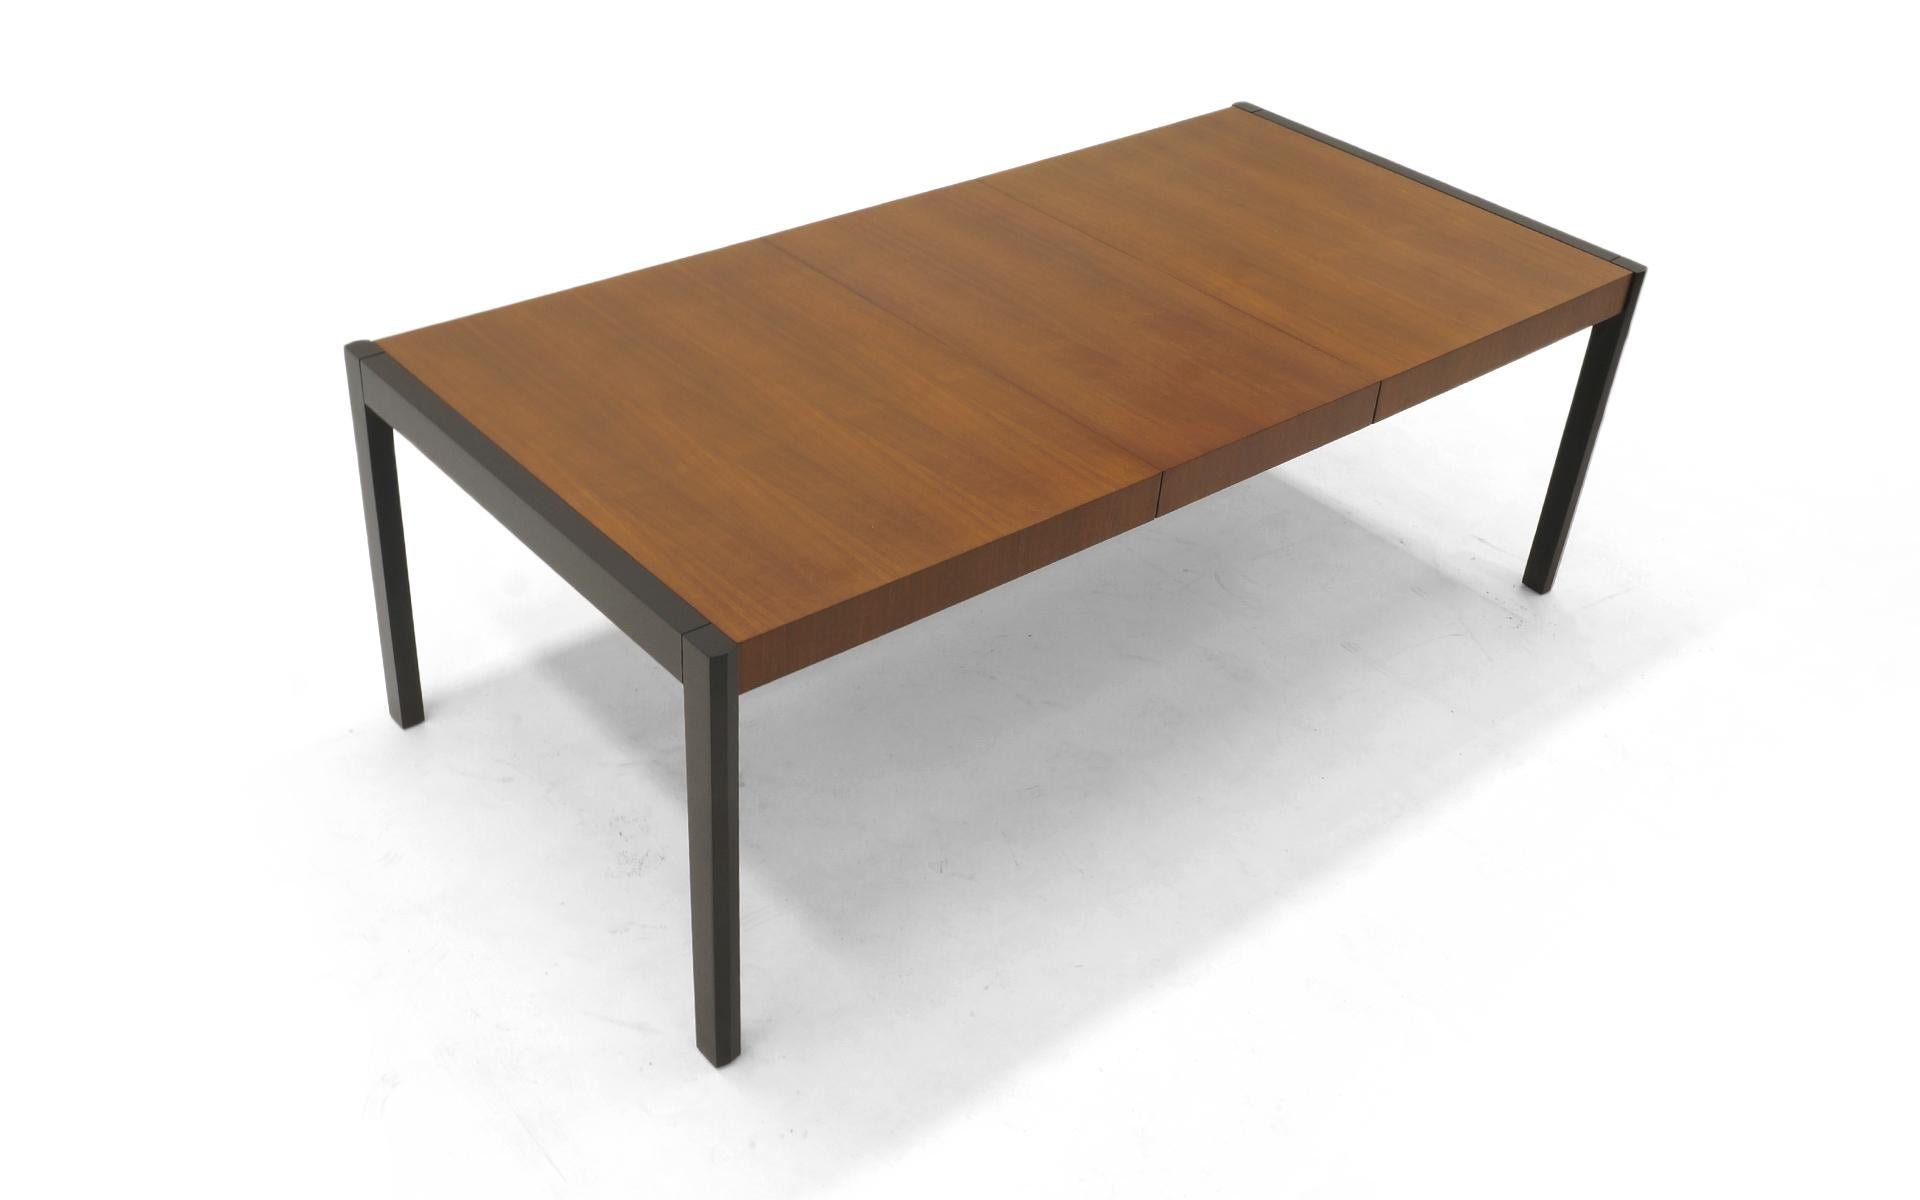 Dining table with leaf by Metropolitan Furniture Company. Expertly refinished walnut top and black lacquered table ends and legs. 
Measures: Table width is 82 inches with leaf, and 62 inches without leaf.